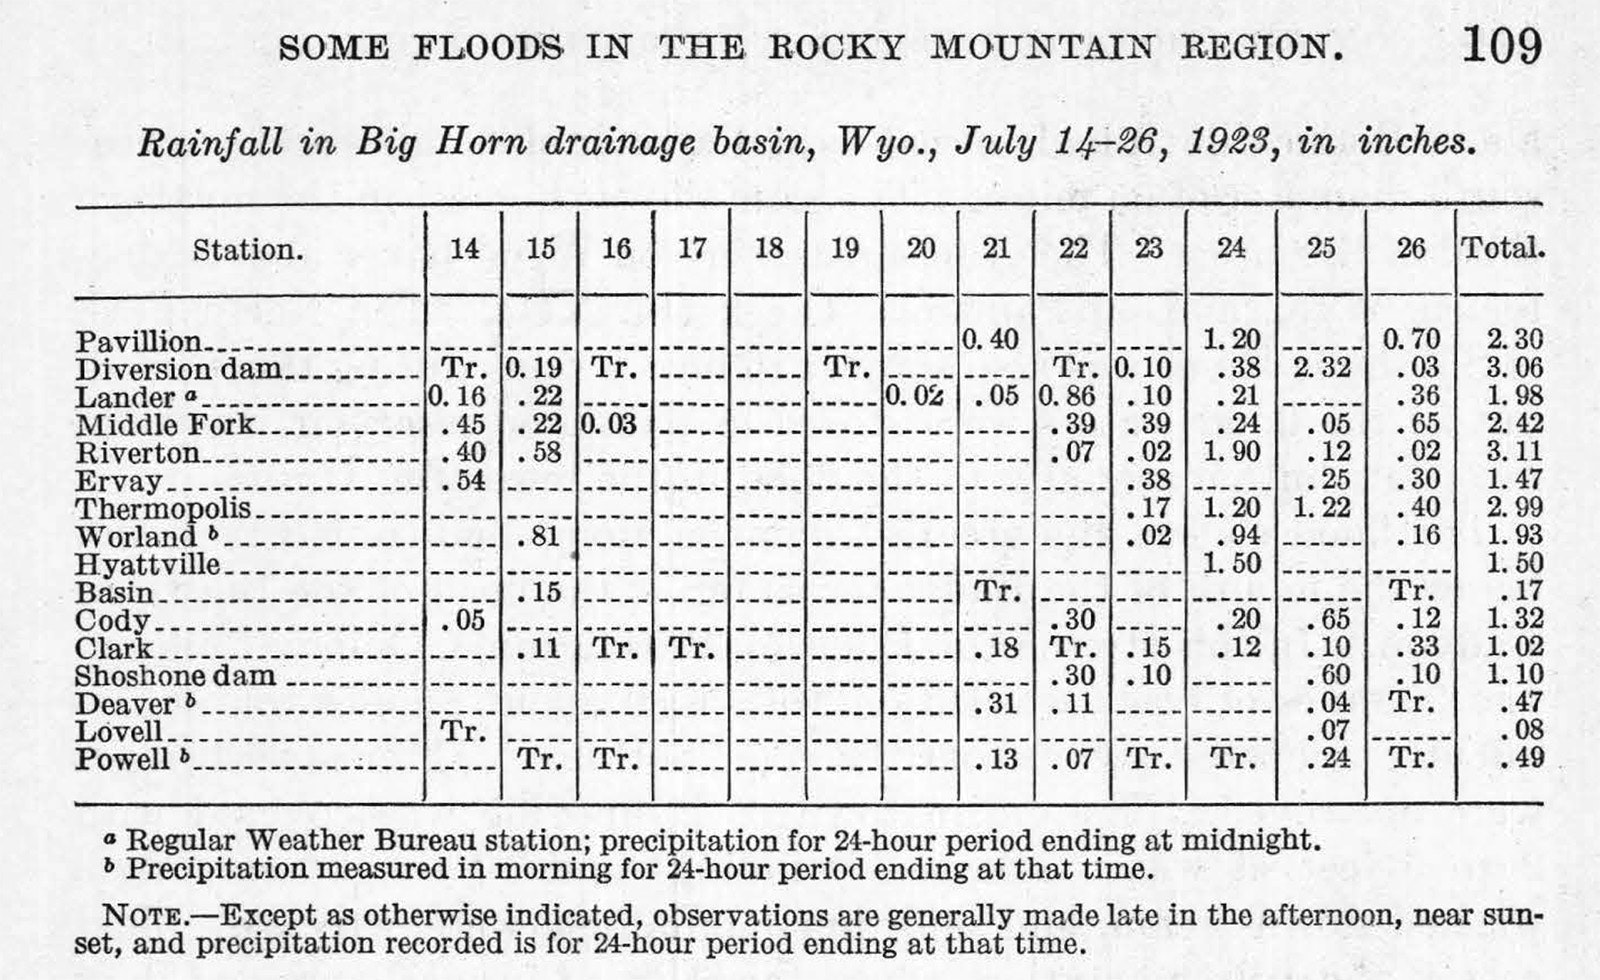 The United States Geological Survey did a report in 1925 on the flooding in Wyoming in 1923.